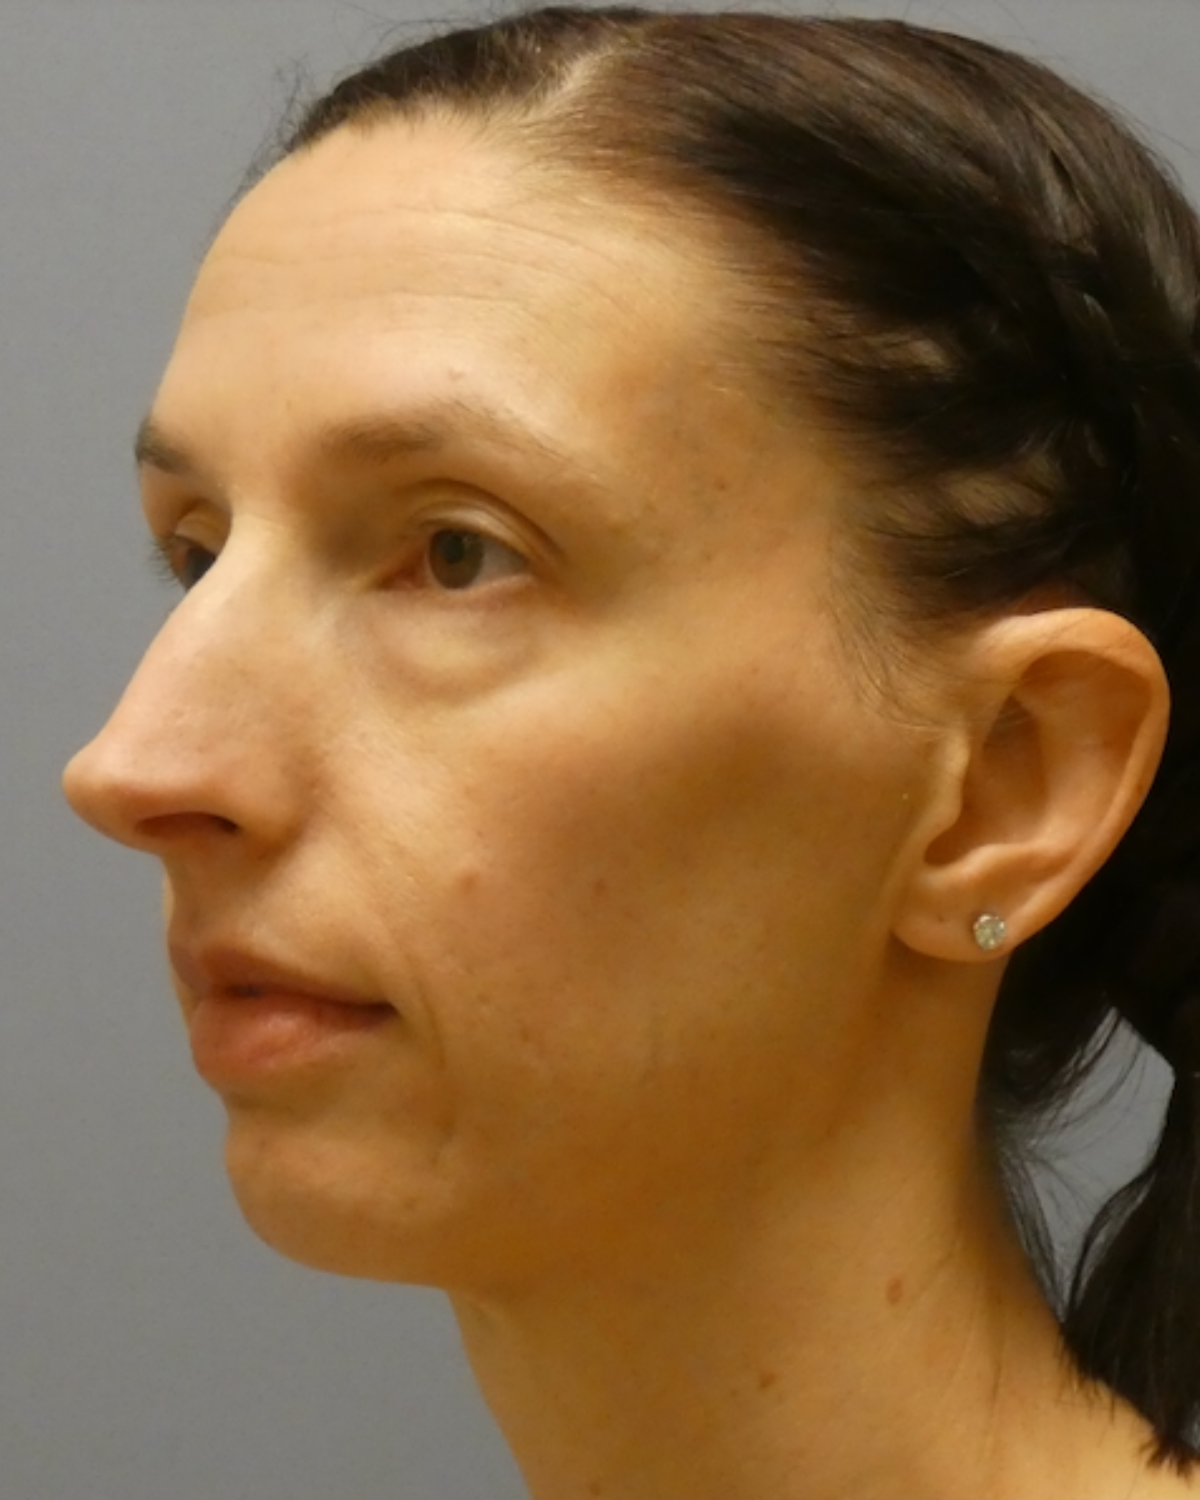 Eyelid Surgery Gallery Before Patient 1